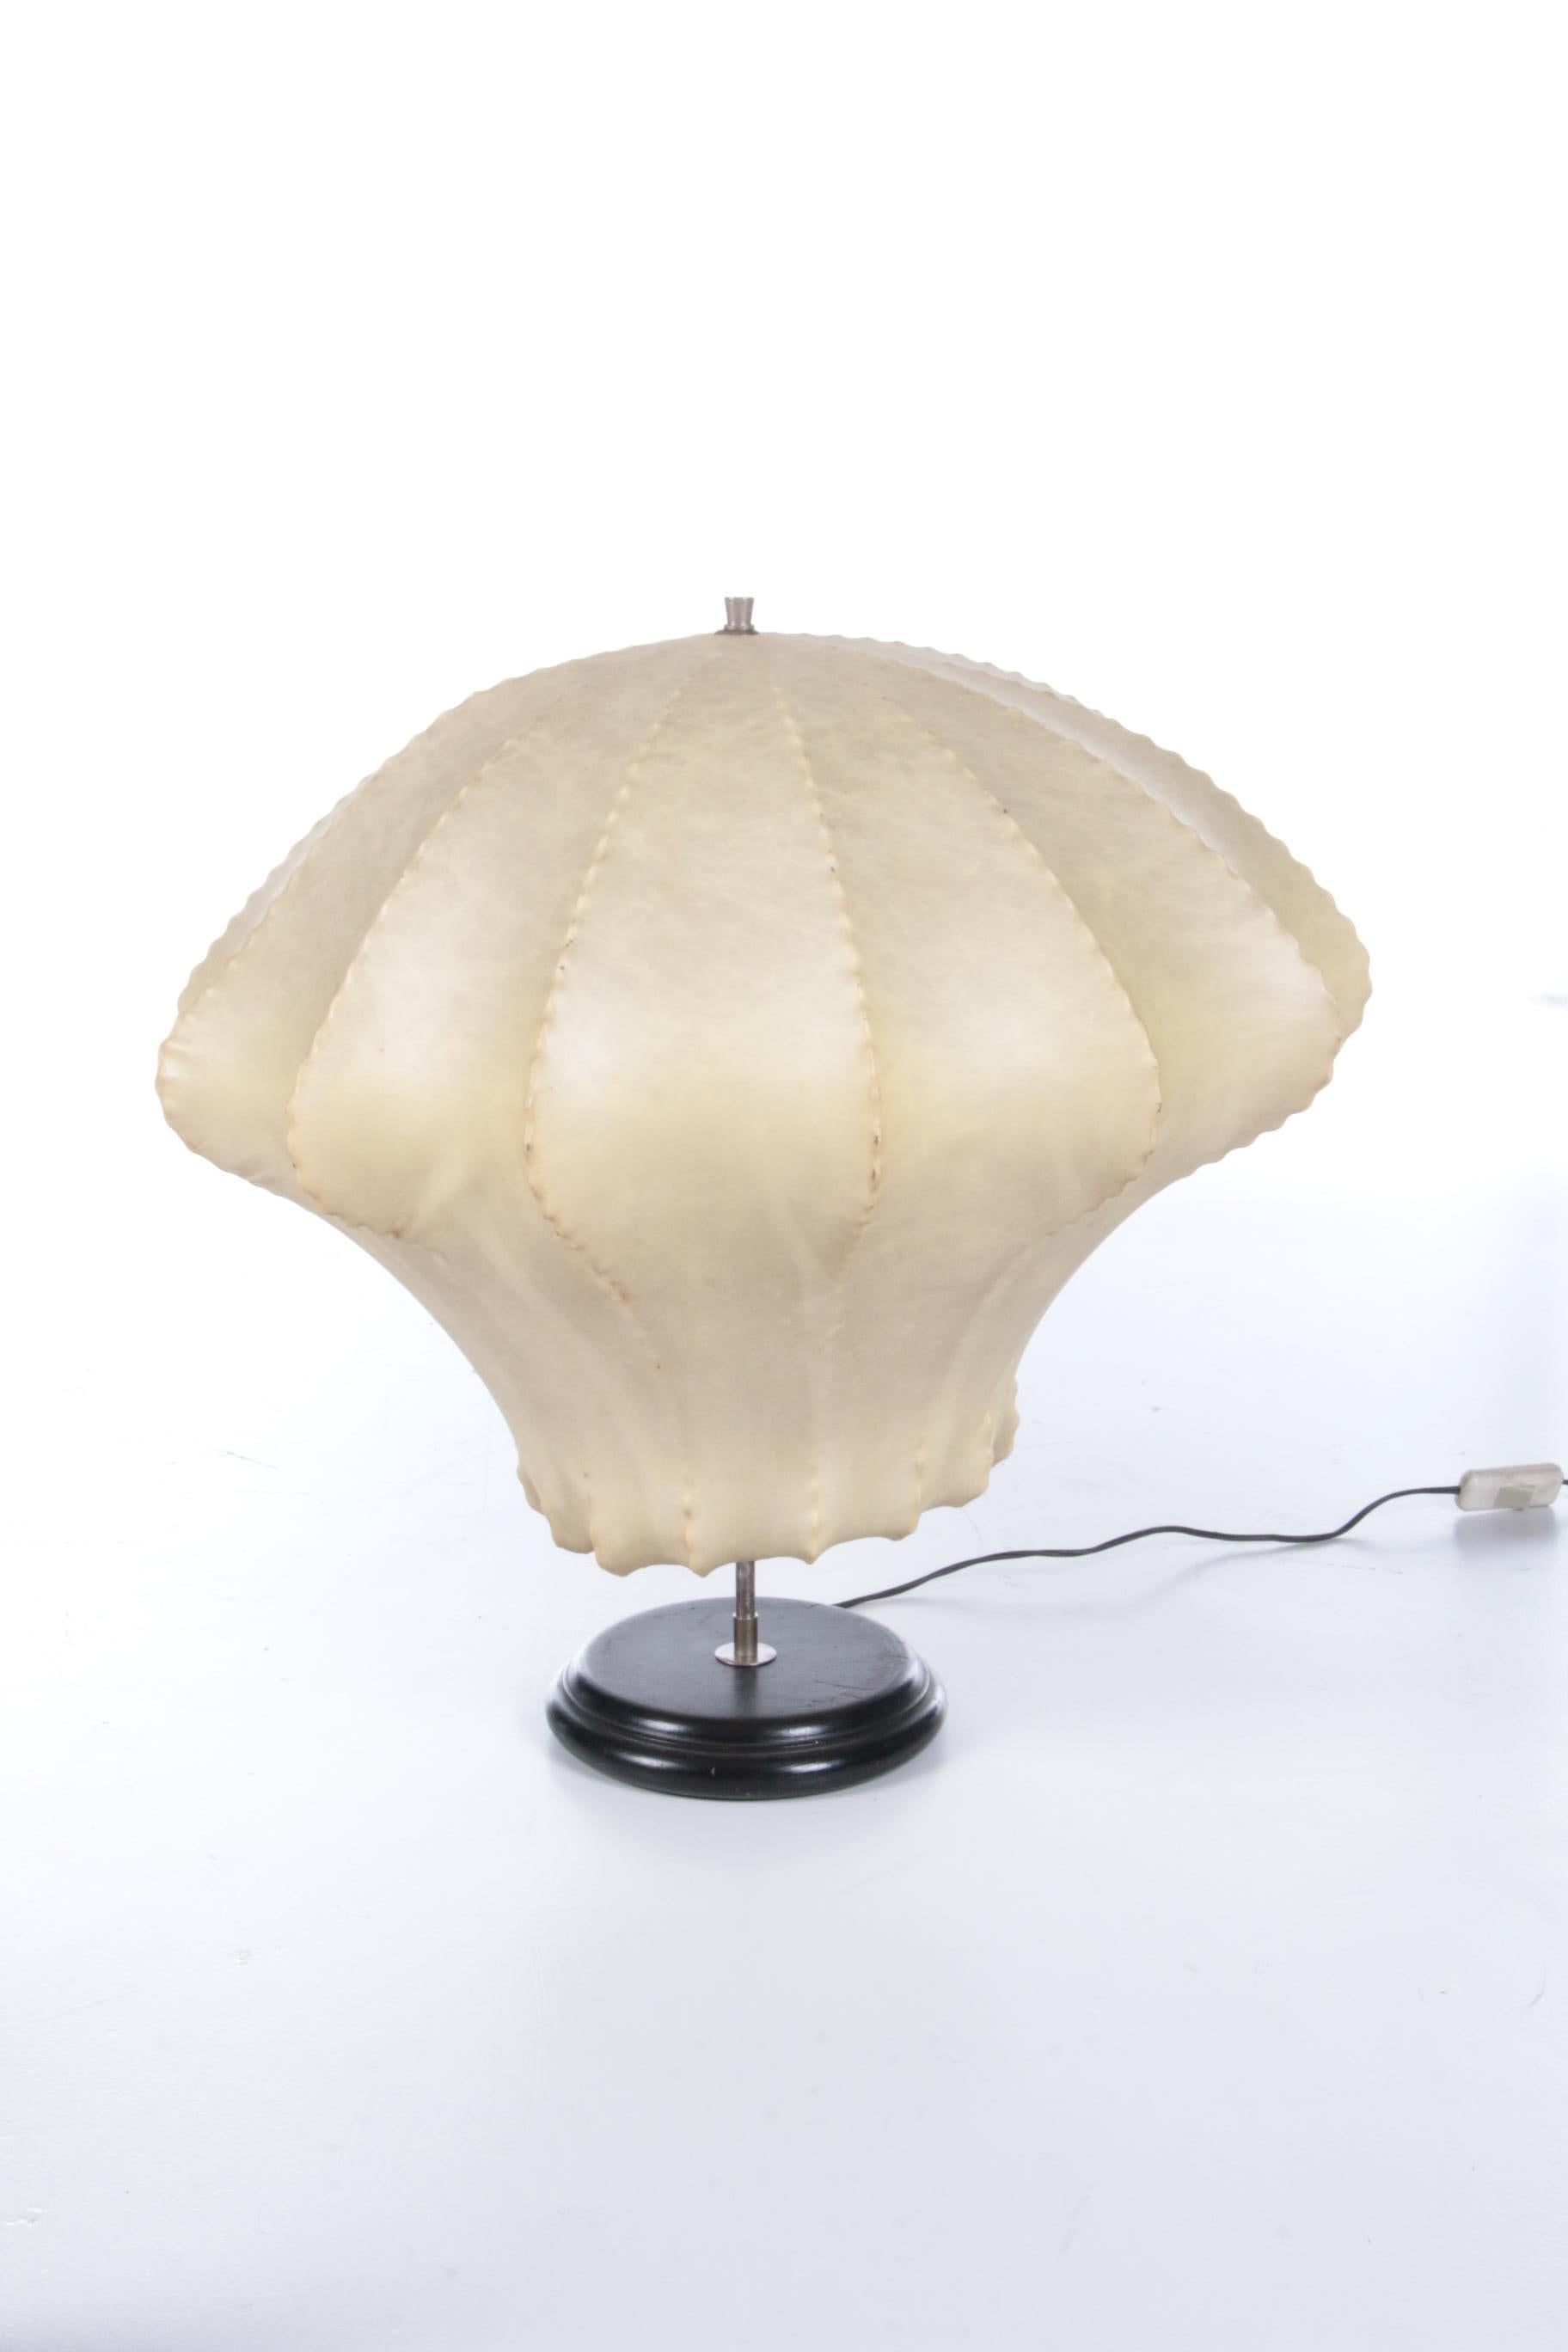 Cocoon table lamp by Castiglioni for Flos 1960 Italy


This is a beautiful table lamp by Castiglioni for Flos, made in Italy in the 1960s.

The table model is a rare model and completely original.

You don't see them much as a table lamp. 1 metal